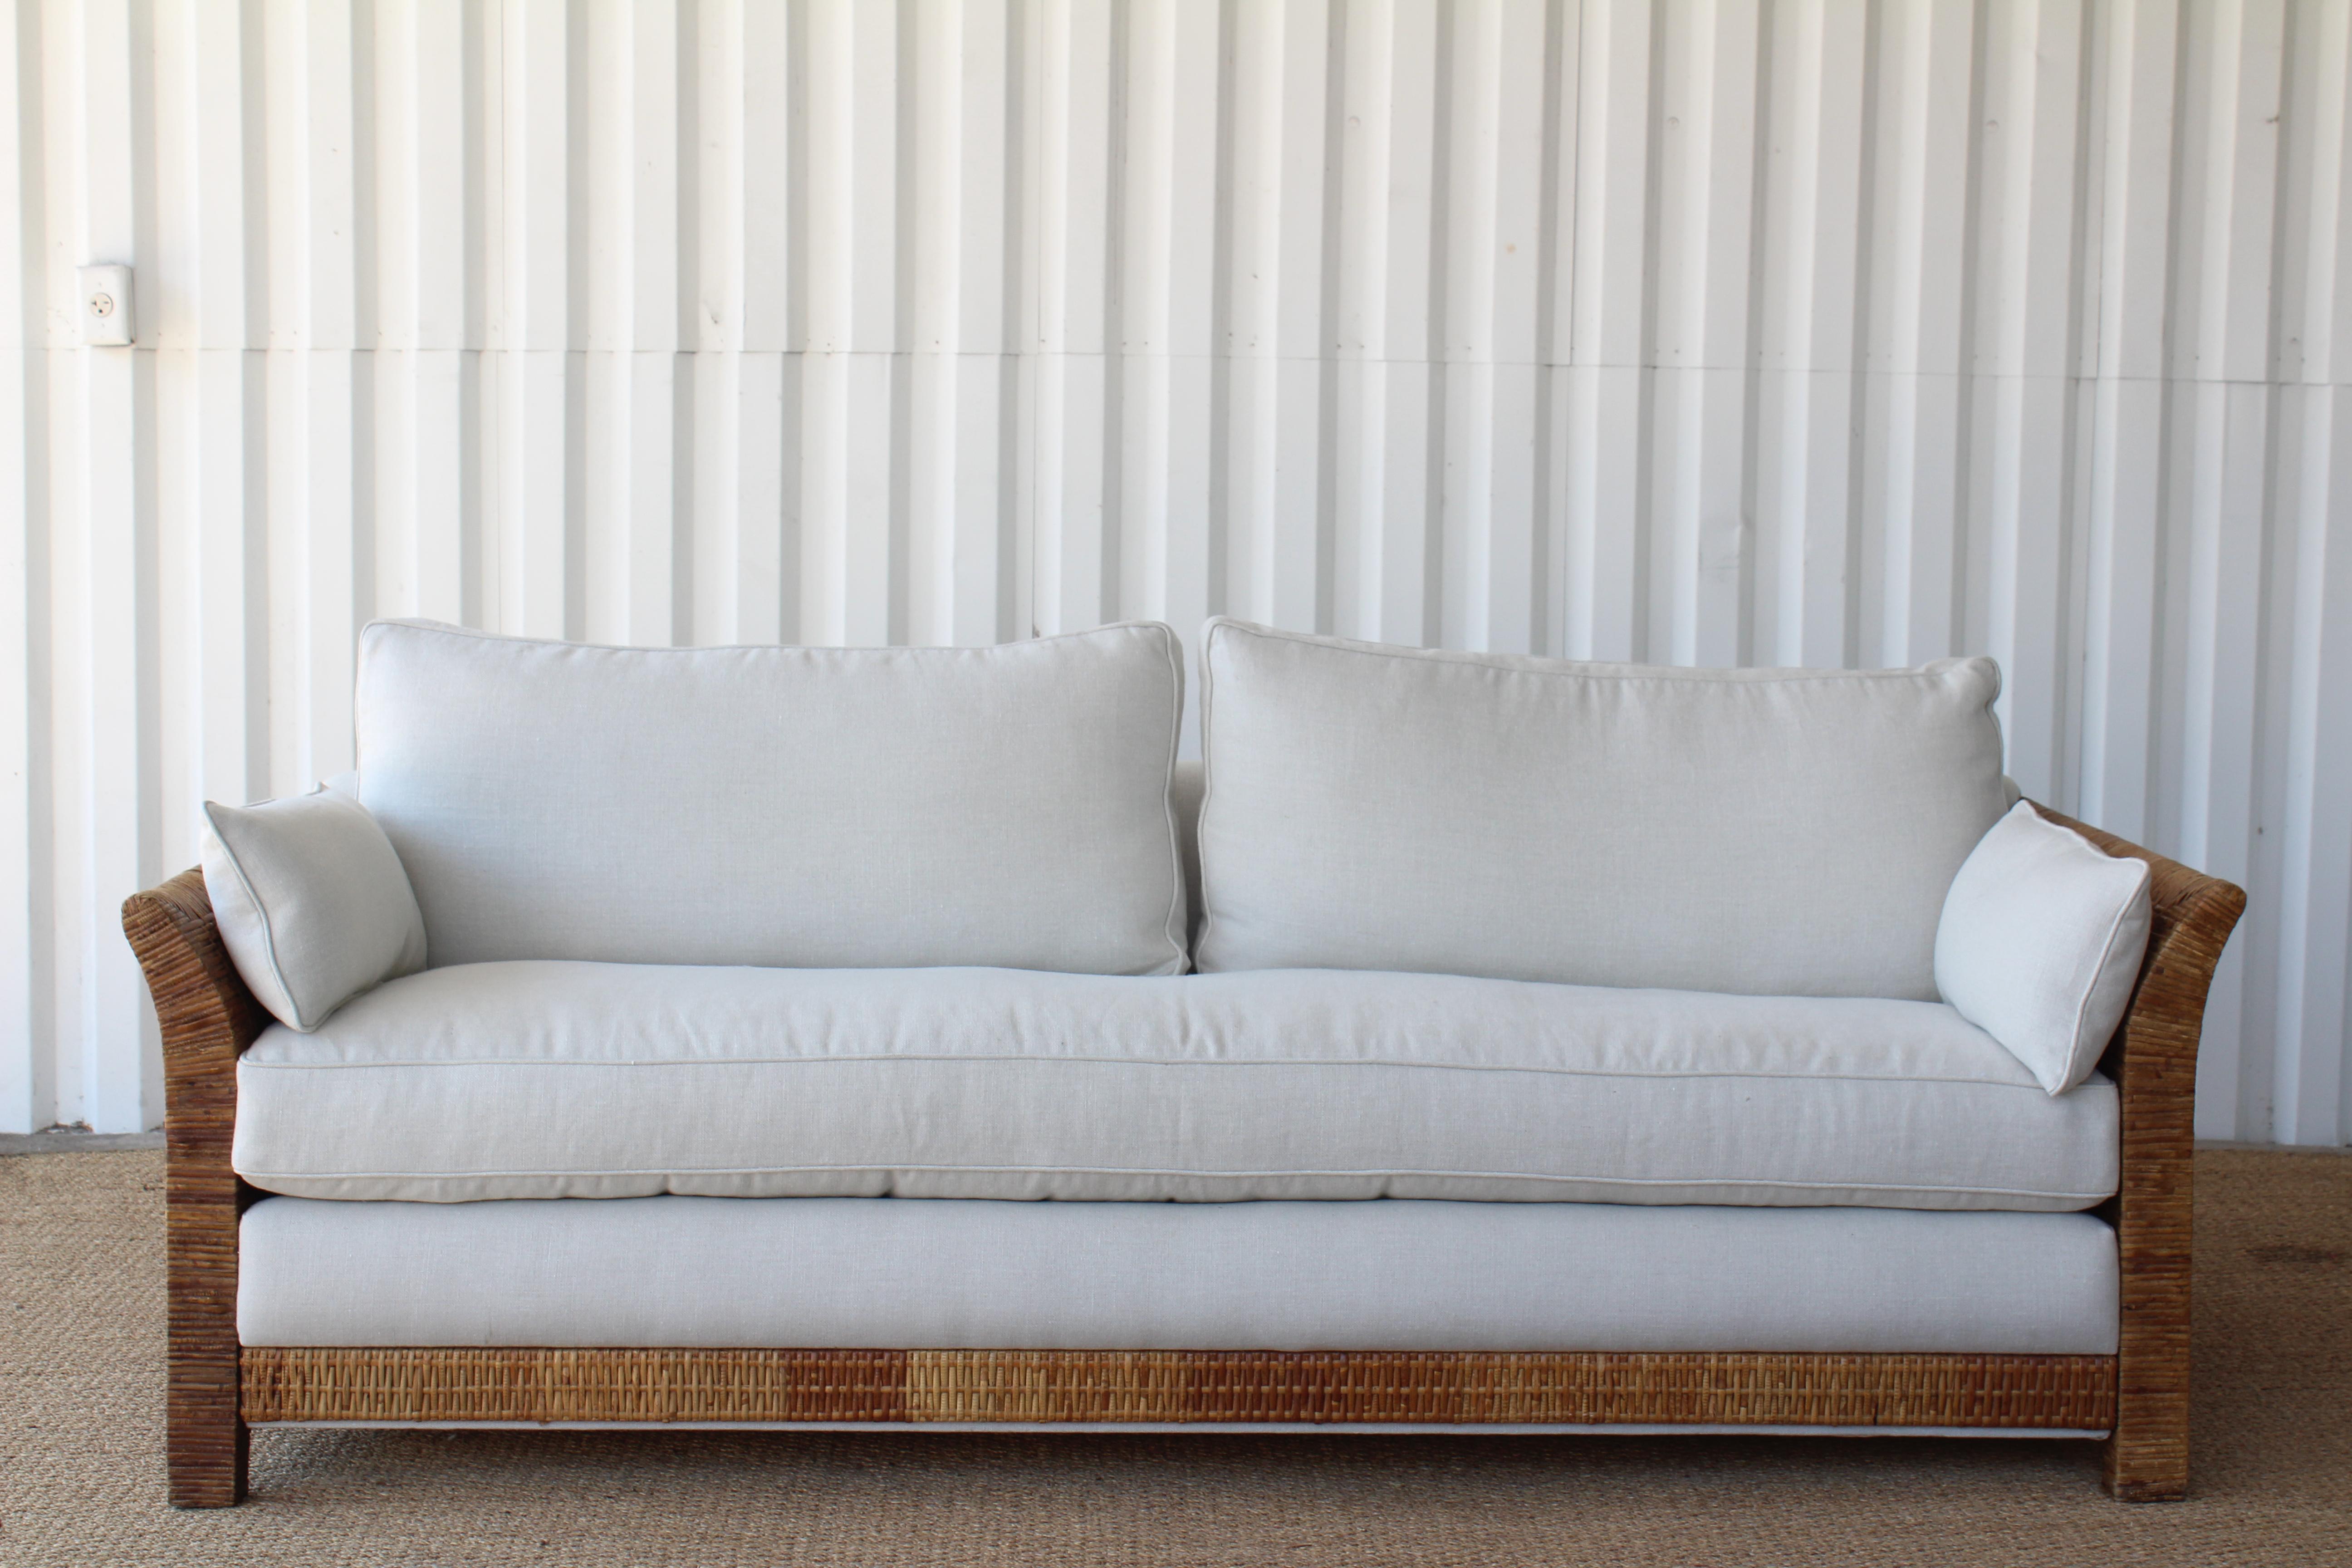 Vintage 1960s rattan framed sofa, newly upholstered in Belgian linen. In good condition with some wear to the rattan frame. Features down-filled pillows.